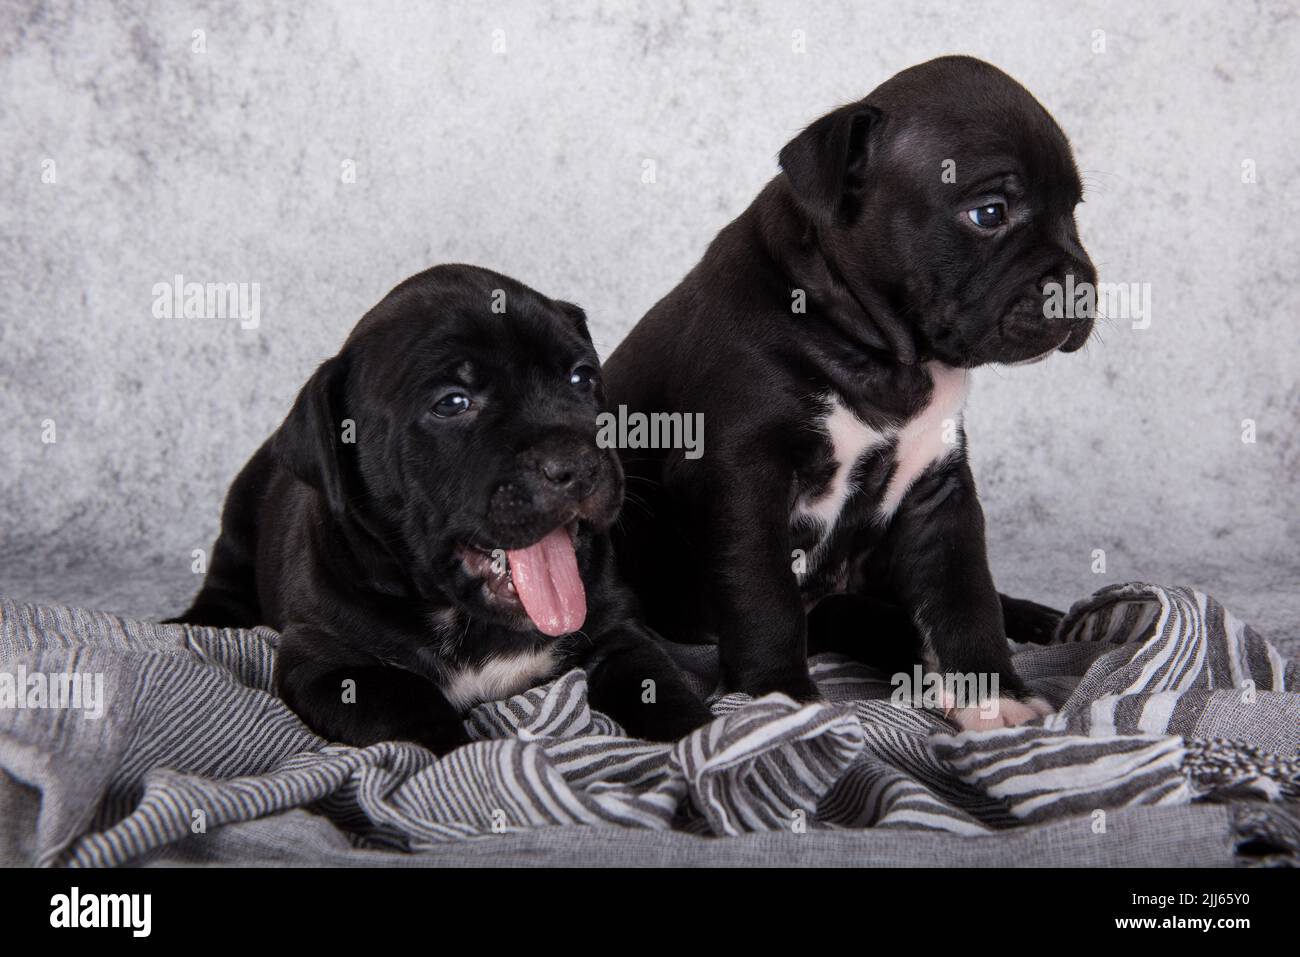 Two Black and white American Staffordshire Terrier dogs or AmStaff puppies on gray background Stock Photo